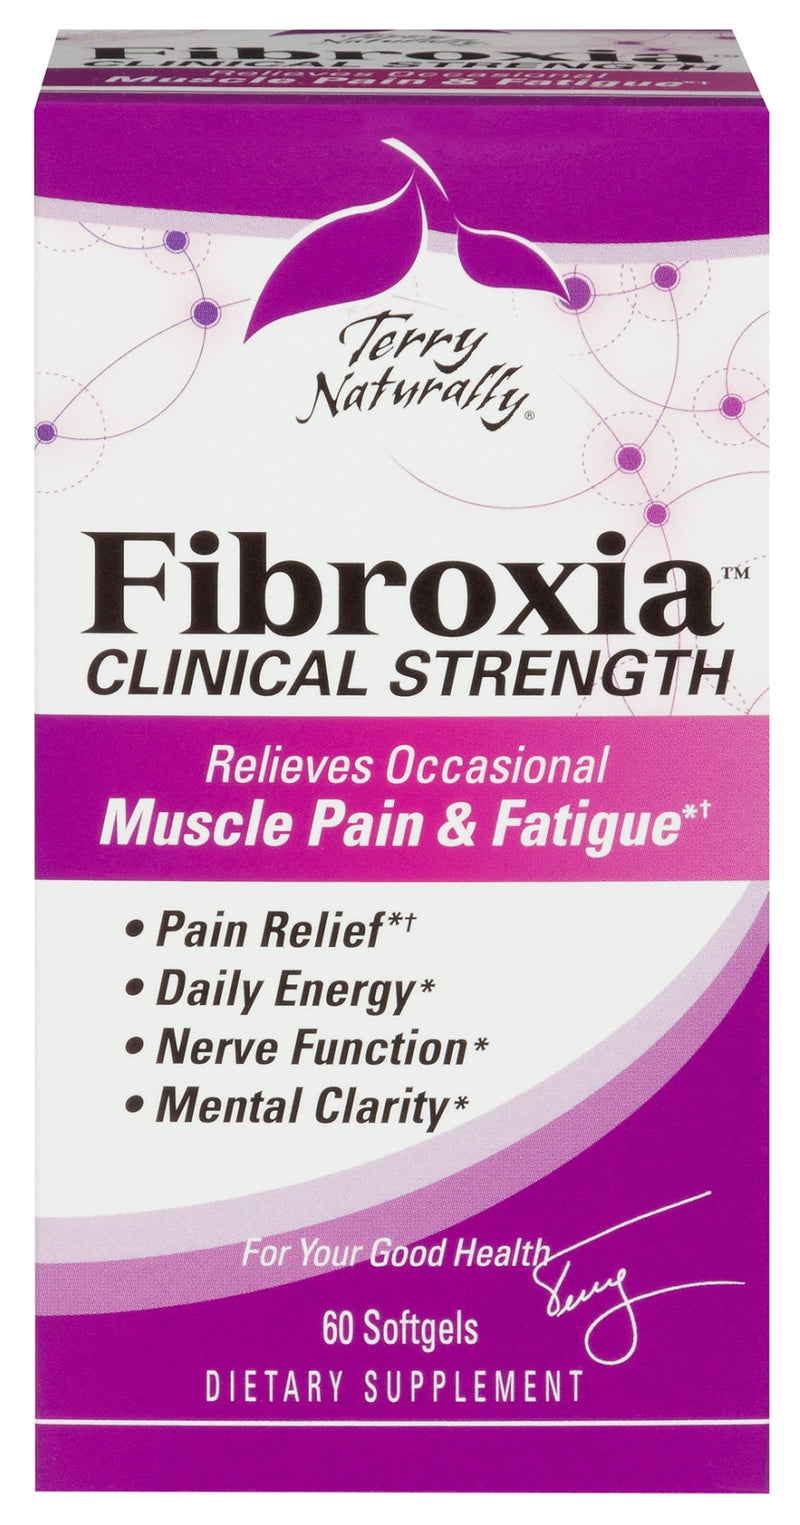 Terry Naturally Fibroxia Clinical Strength 60 Softgels